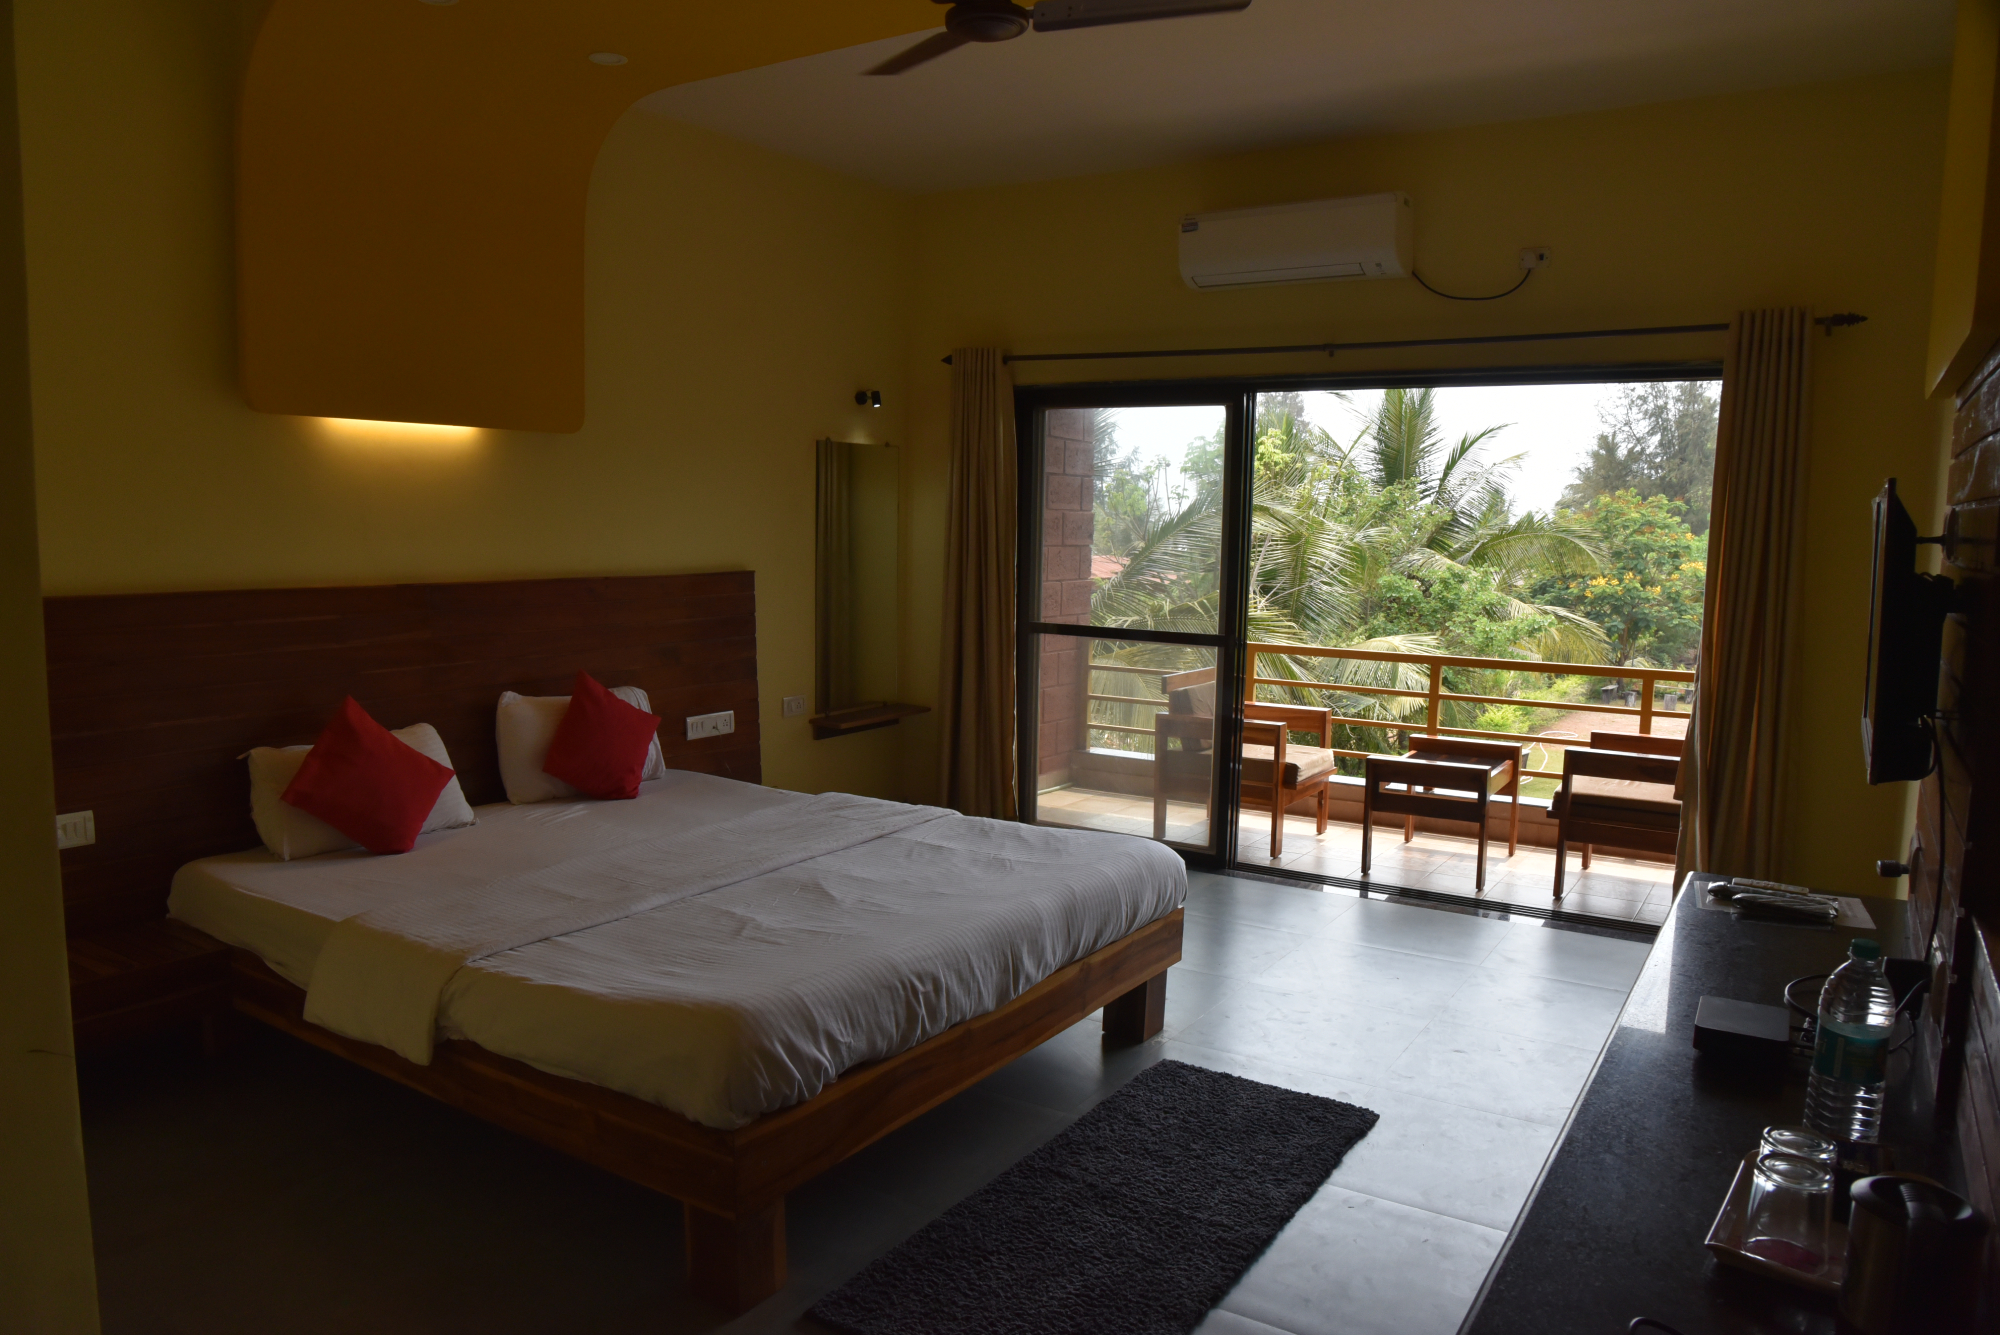 Couple Suite With Sea View Room In Murud